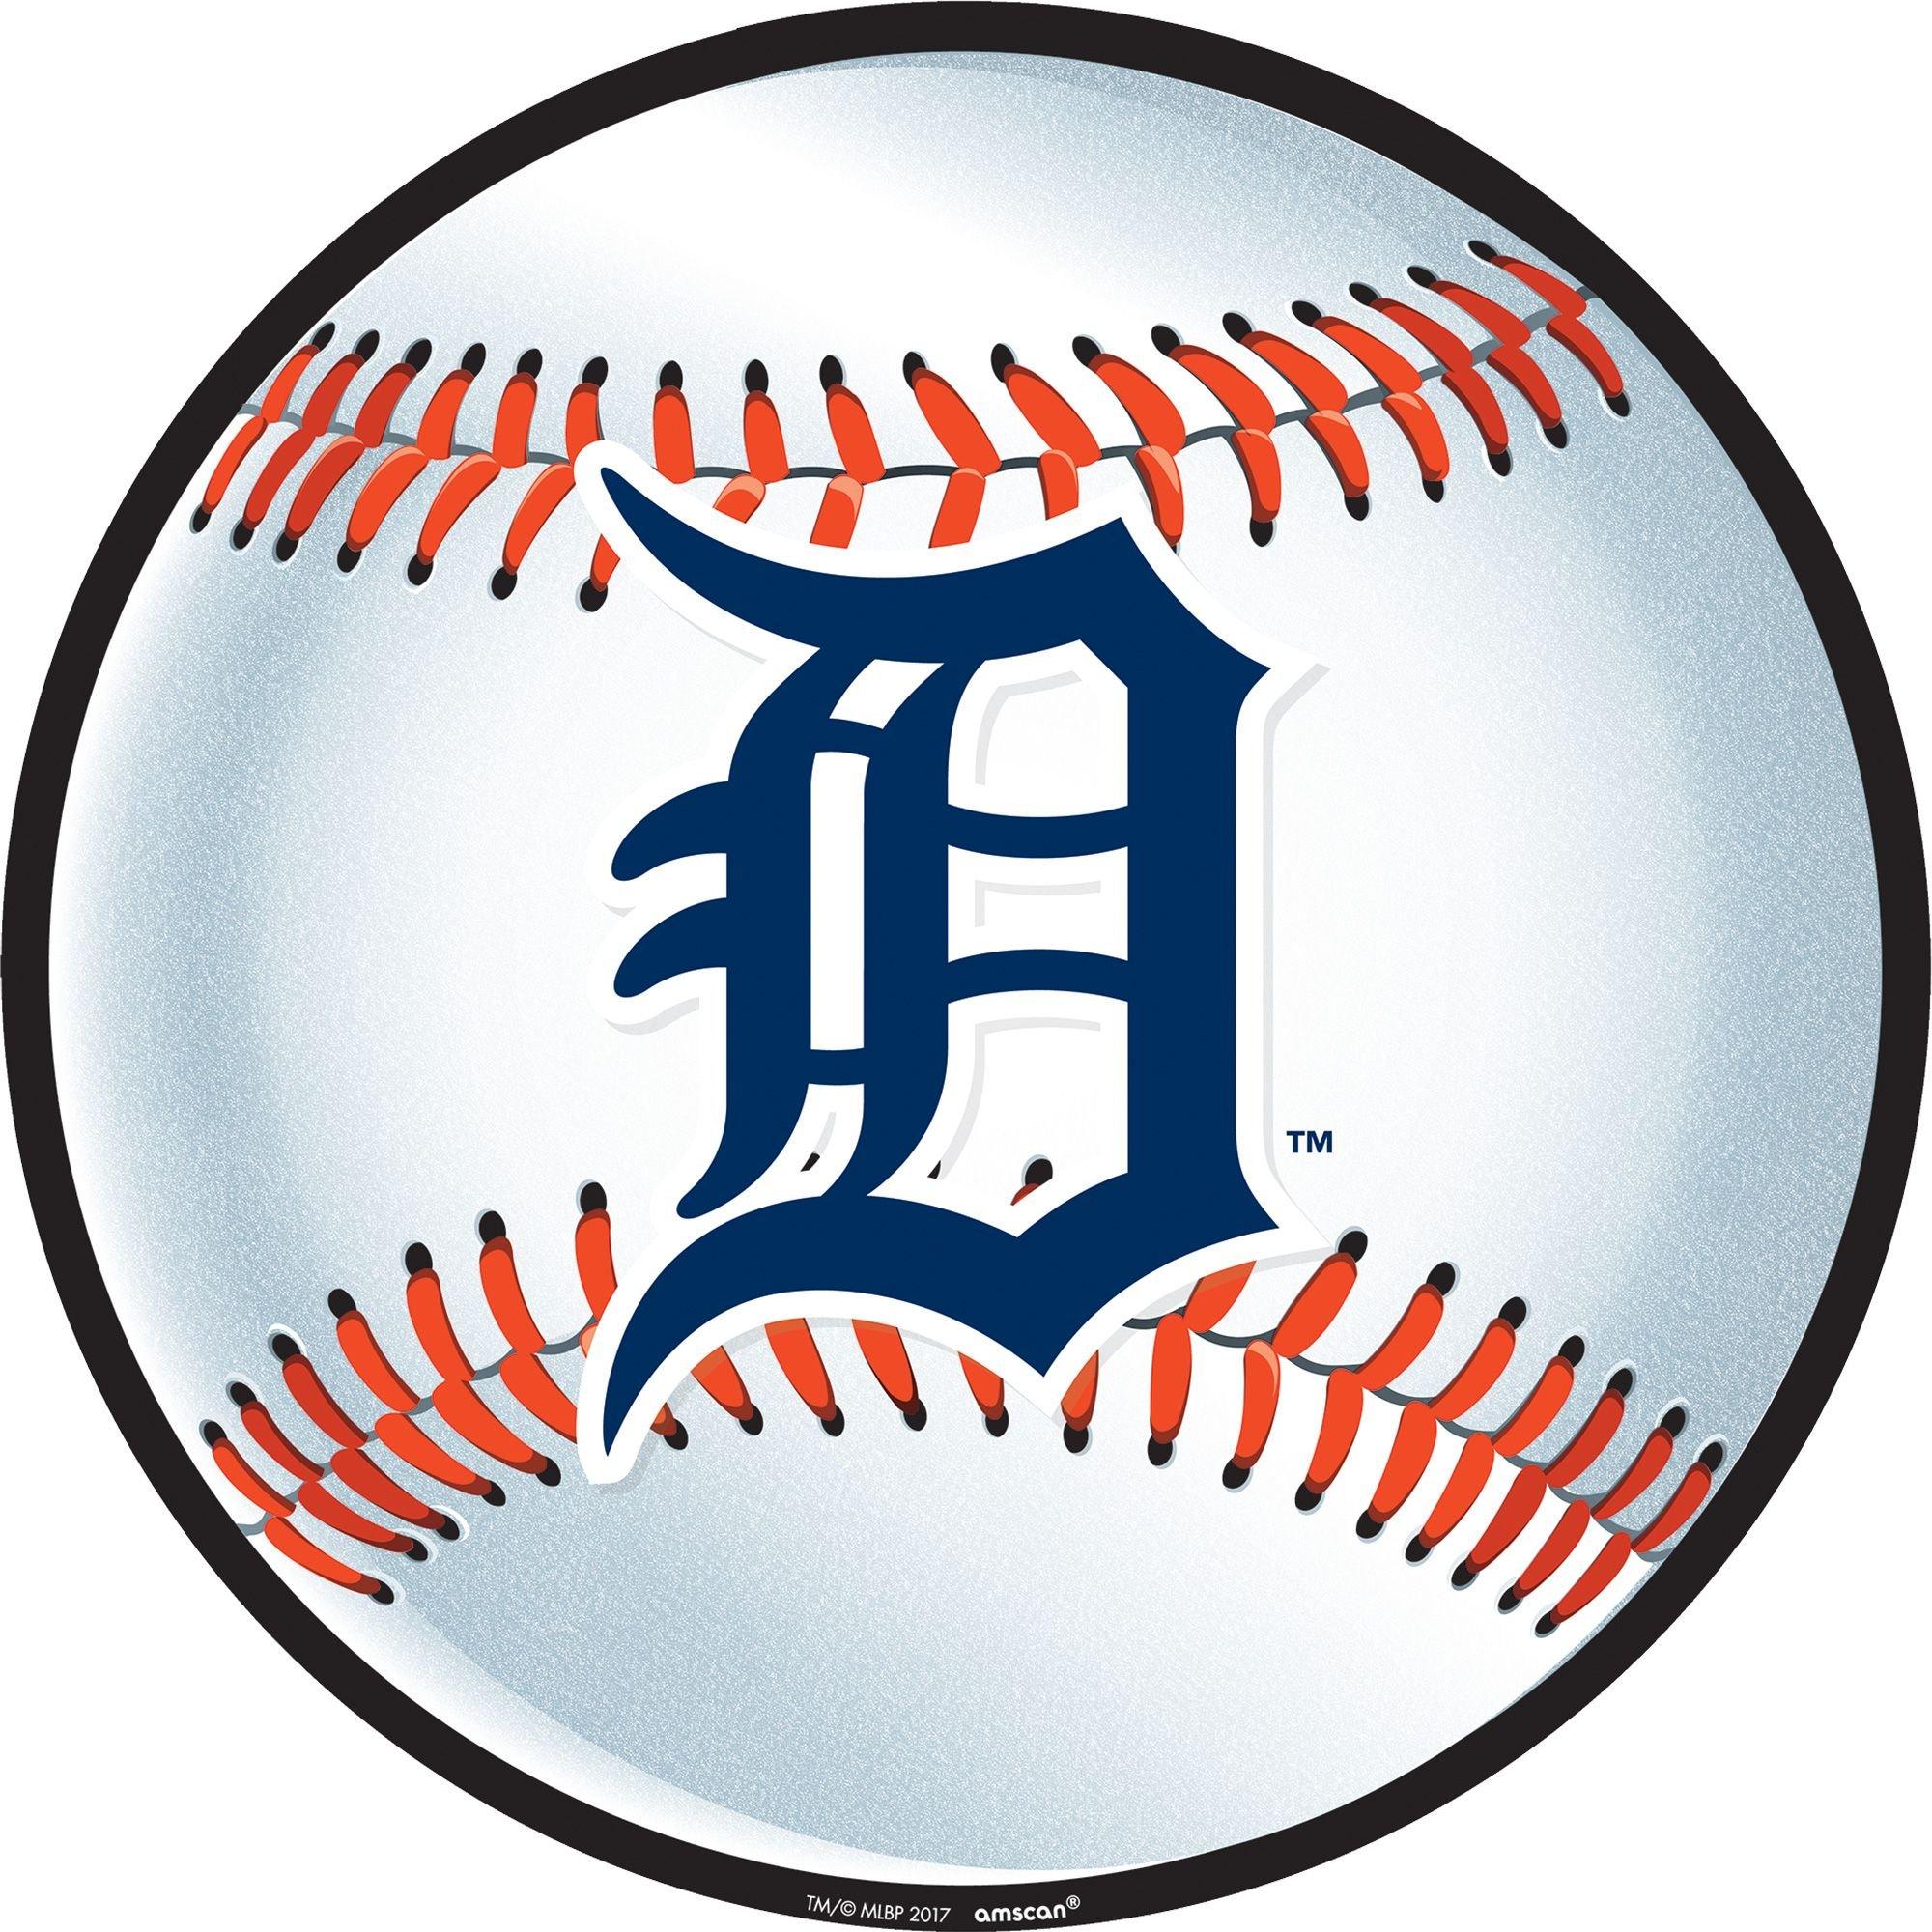 Detroit Tigers Baseball Game outfit inspo  Baseball game outfits, Gaming  clothes, Detroit tigers baseball